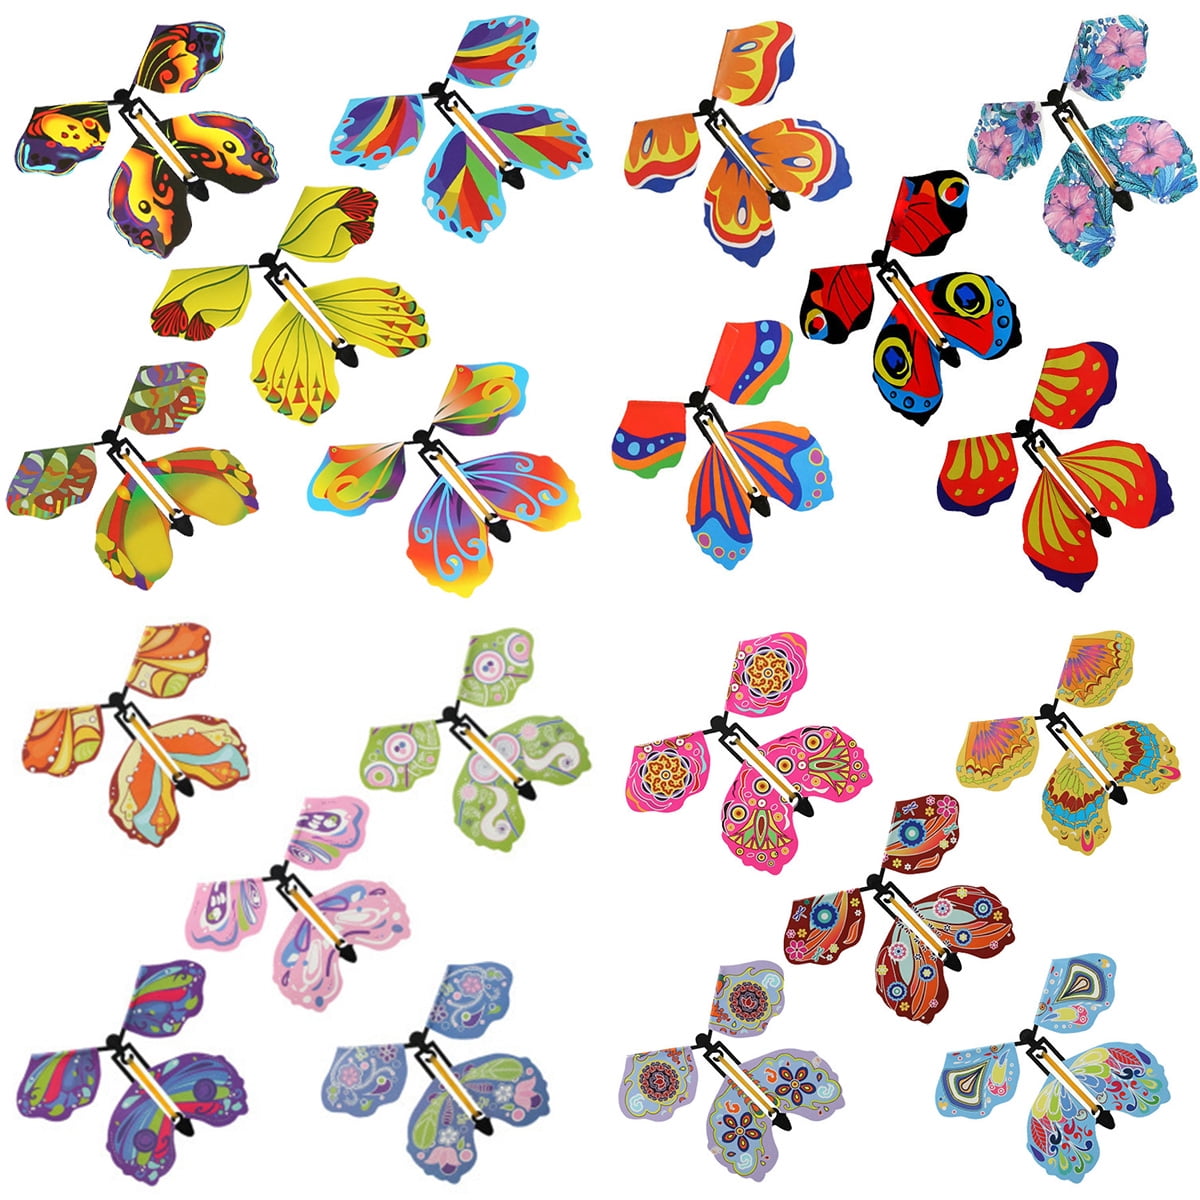  5 Pcs Butterfly Wind up Magic Flying Butterfly Cards Surprise  Insert Toys Rubber Band Butterfly Toys for Explosion Box Colorful Bookmark  Gifts : Toys & Games